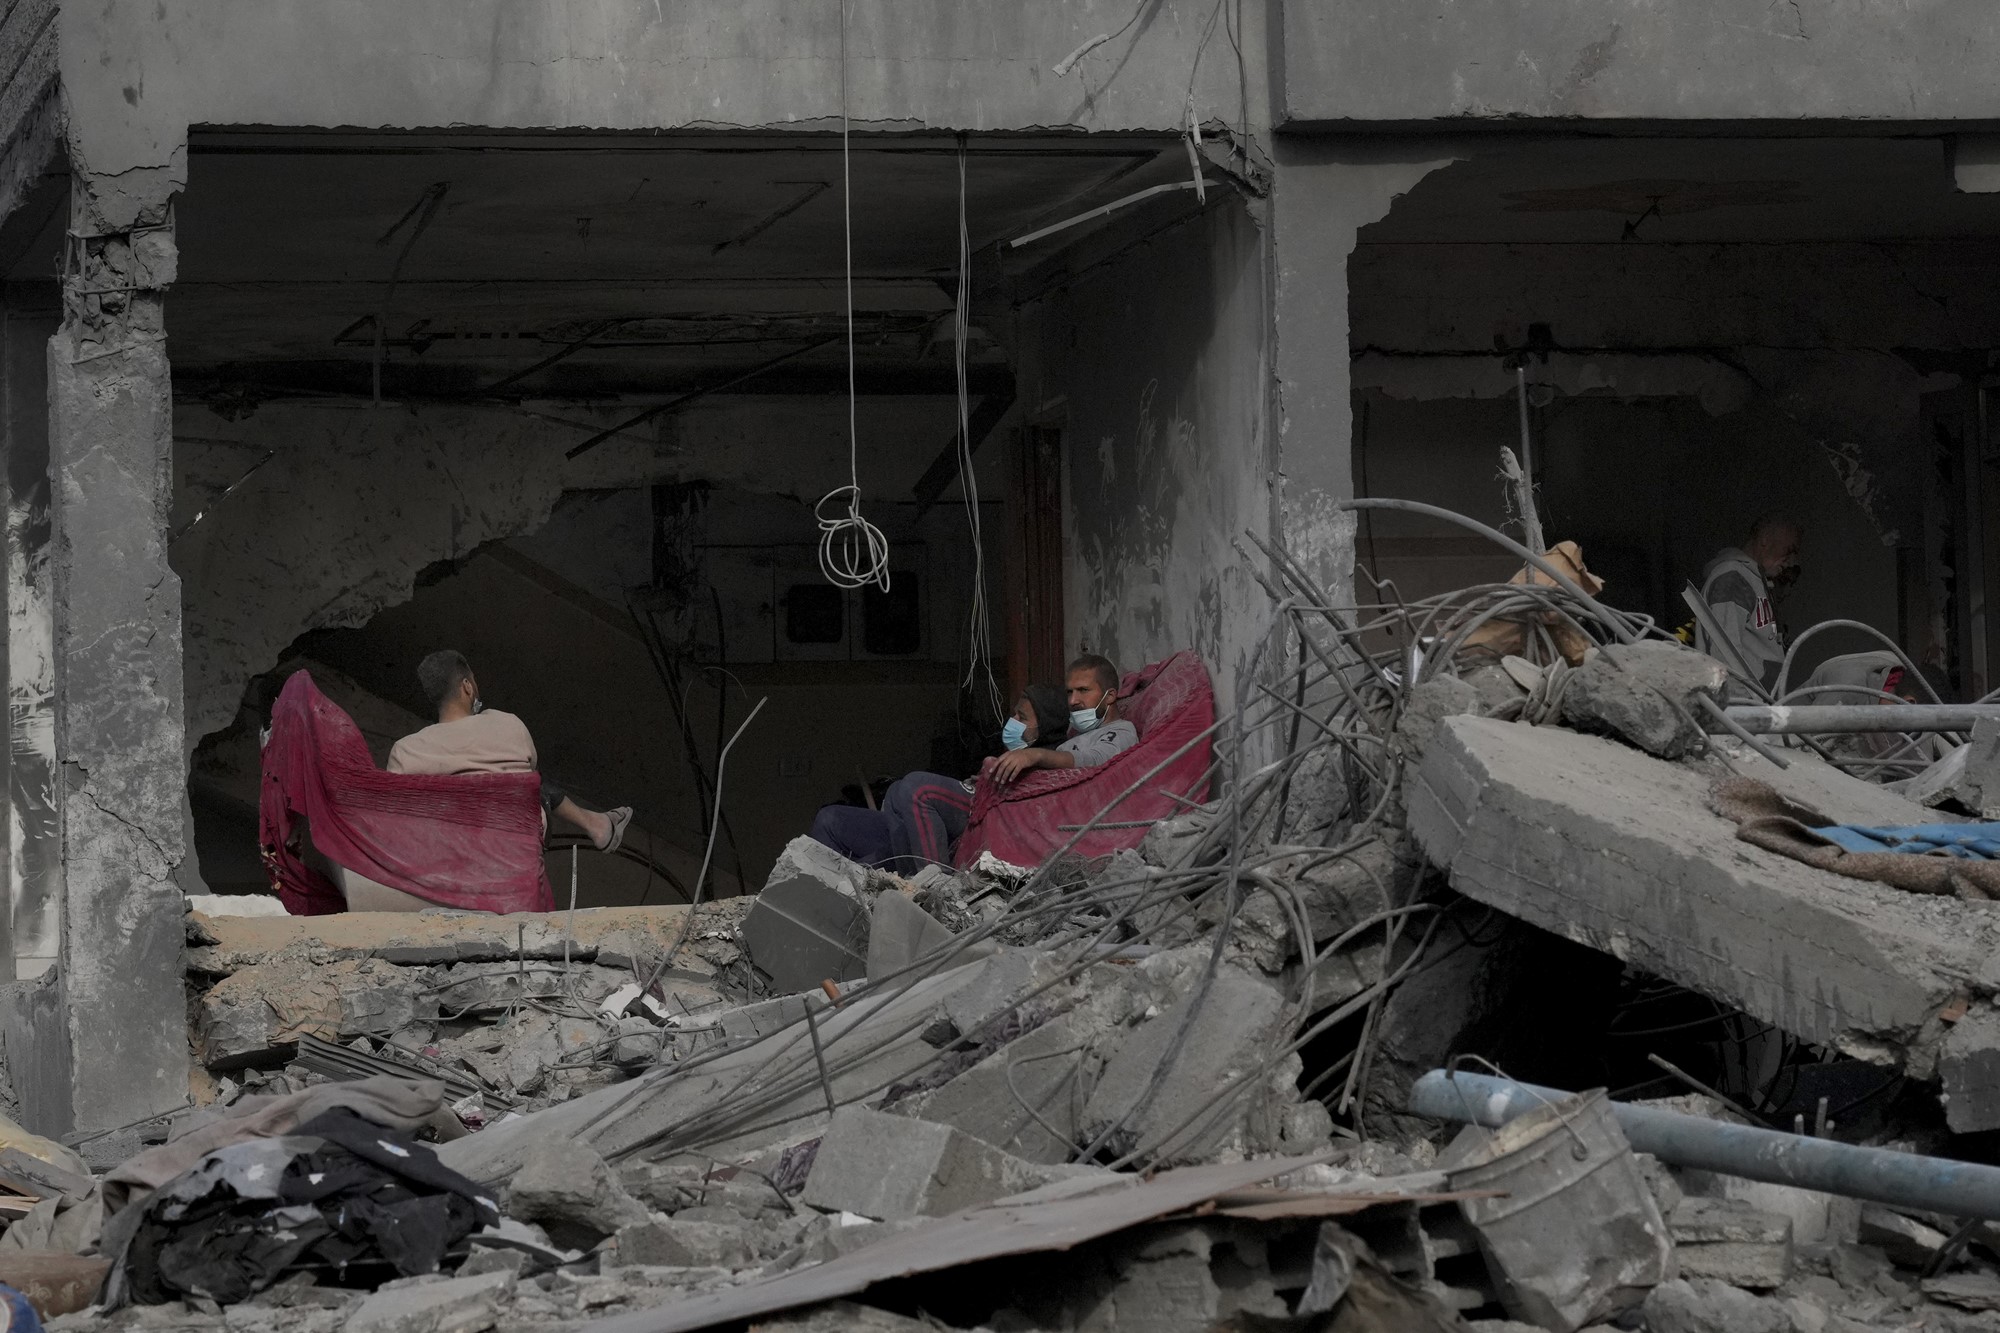 Palestinians sit amid rubble on red chairs 